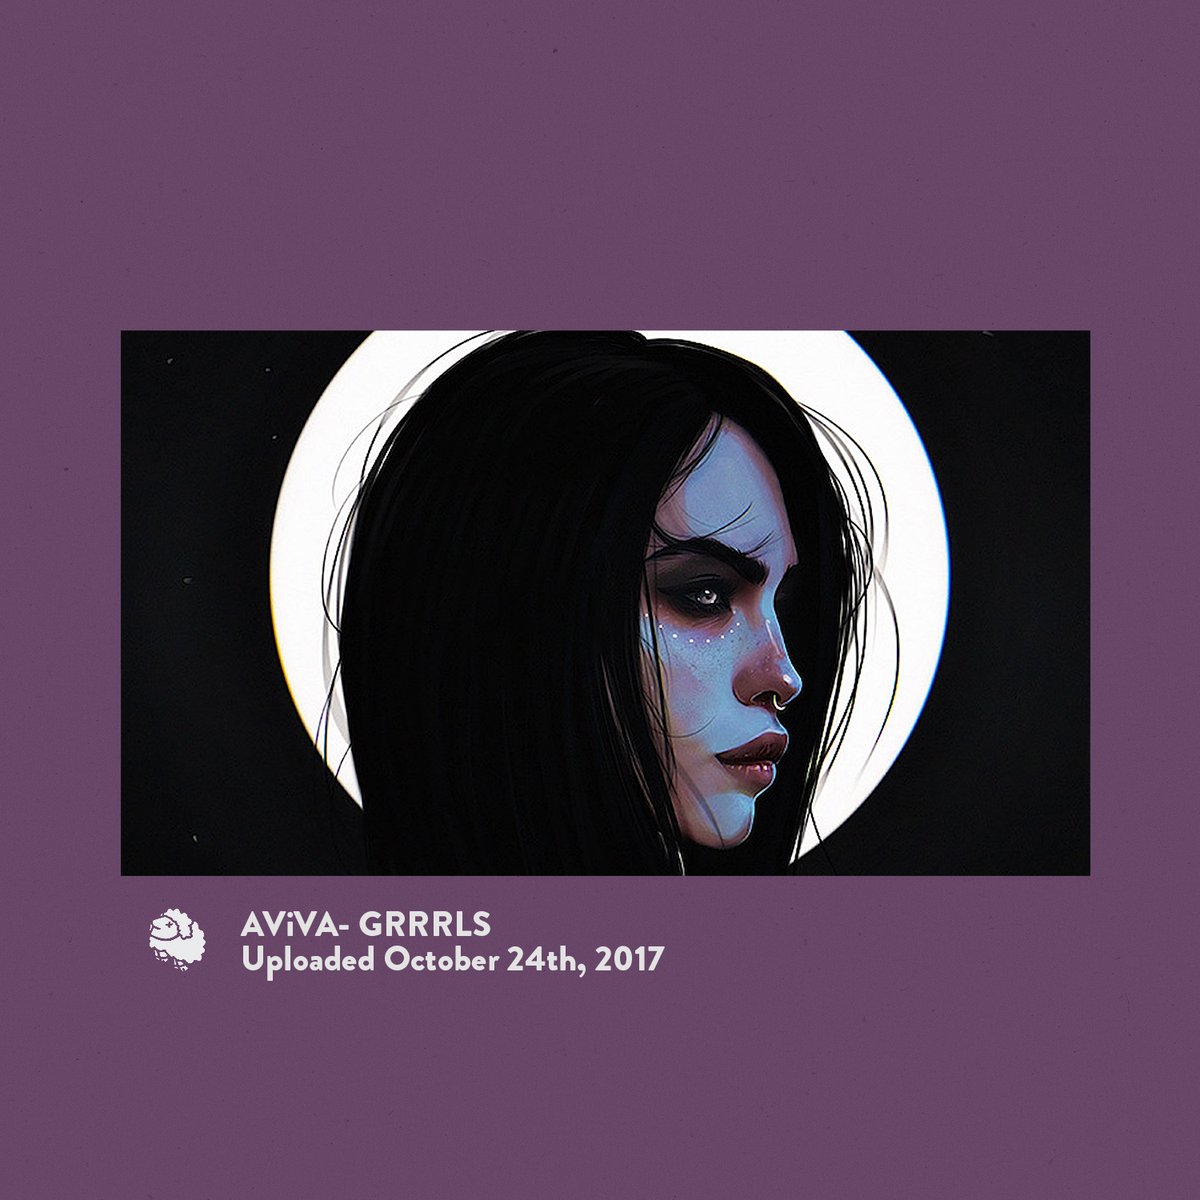 5 years ago today, I uploaded GRRRLS by @thisisaviva. Since then, I've featured AViVA countless times. Her music has always had a way of hooking me in instantly! Happy upload anniversary to GRRRLS!